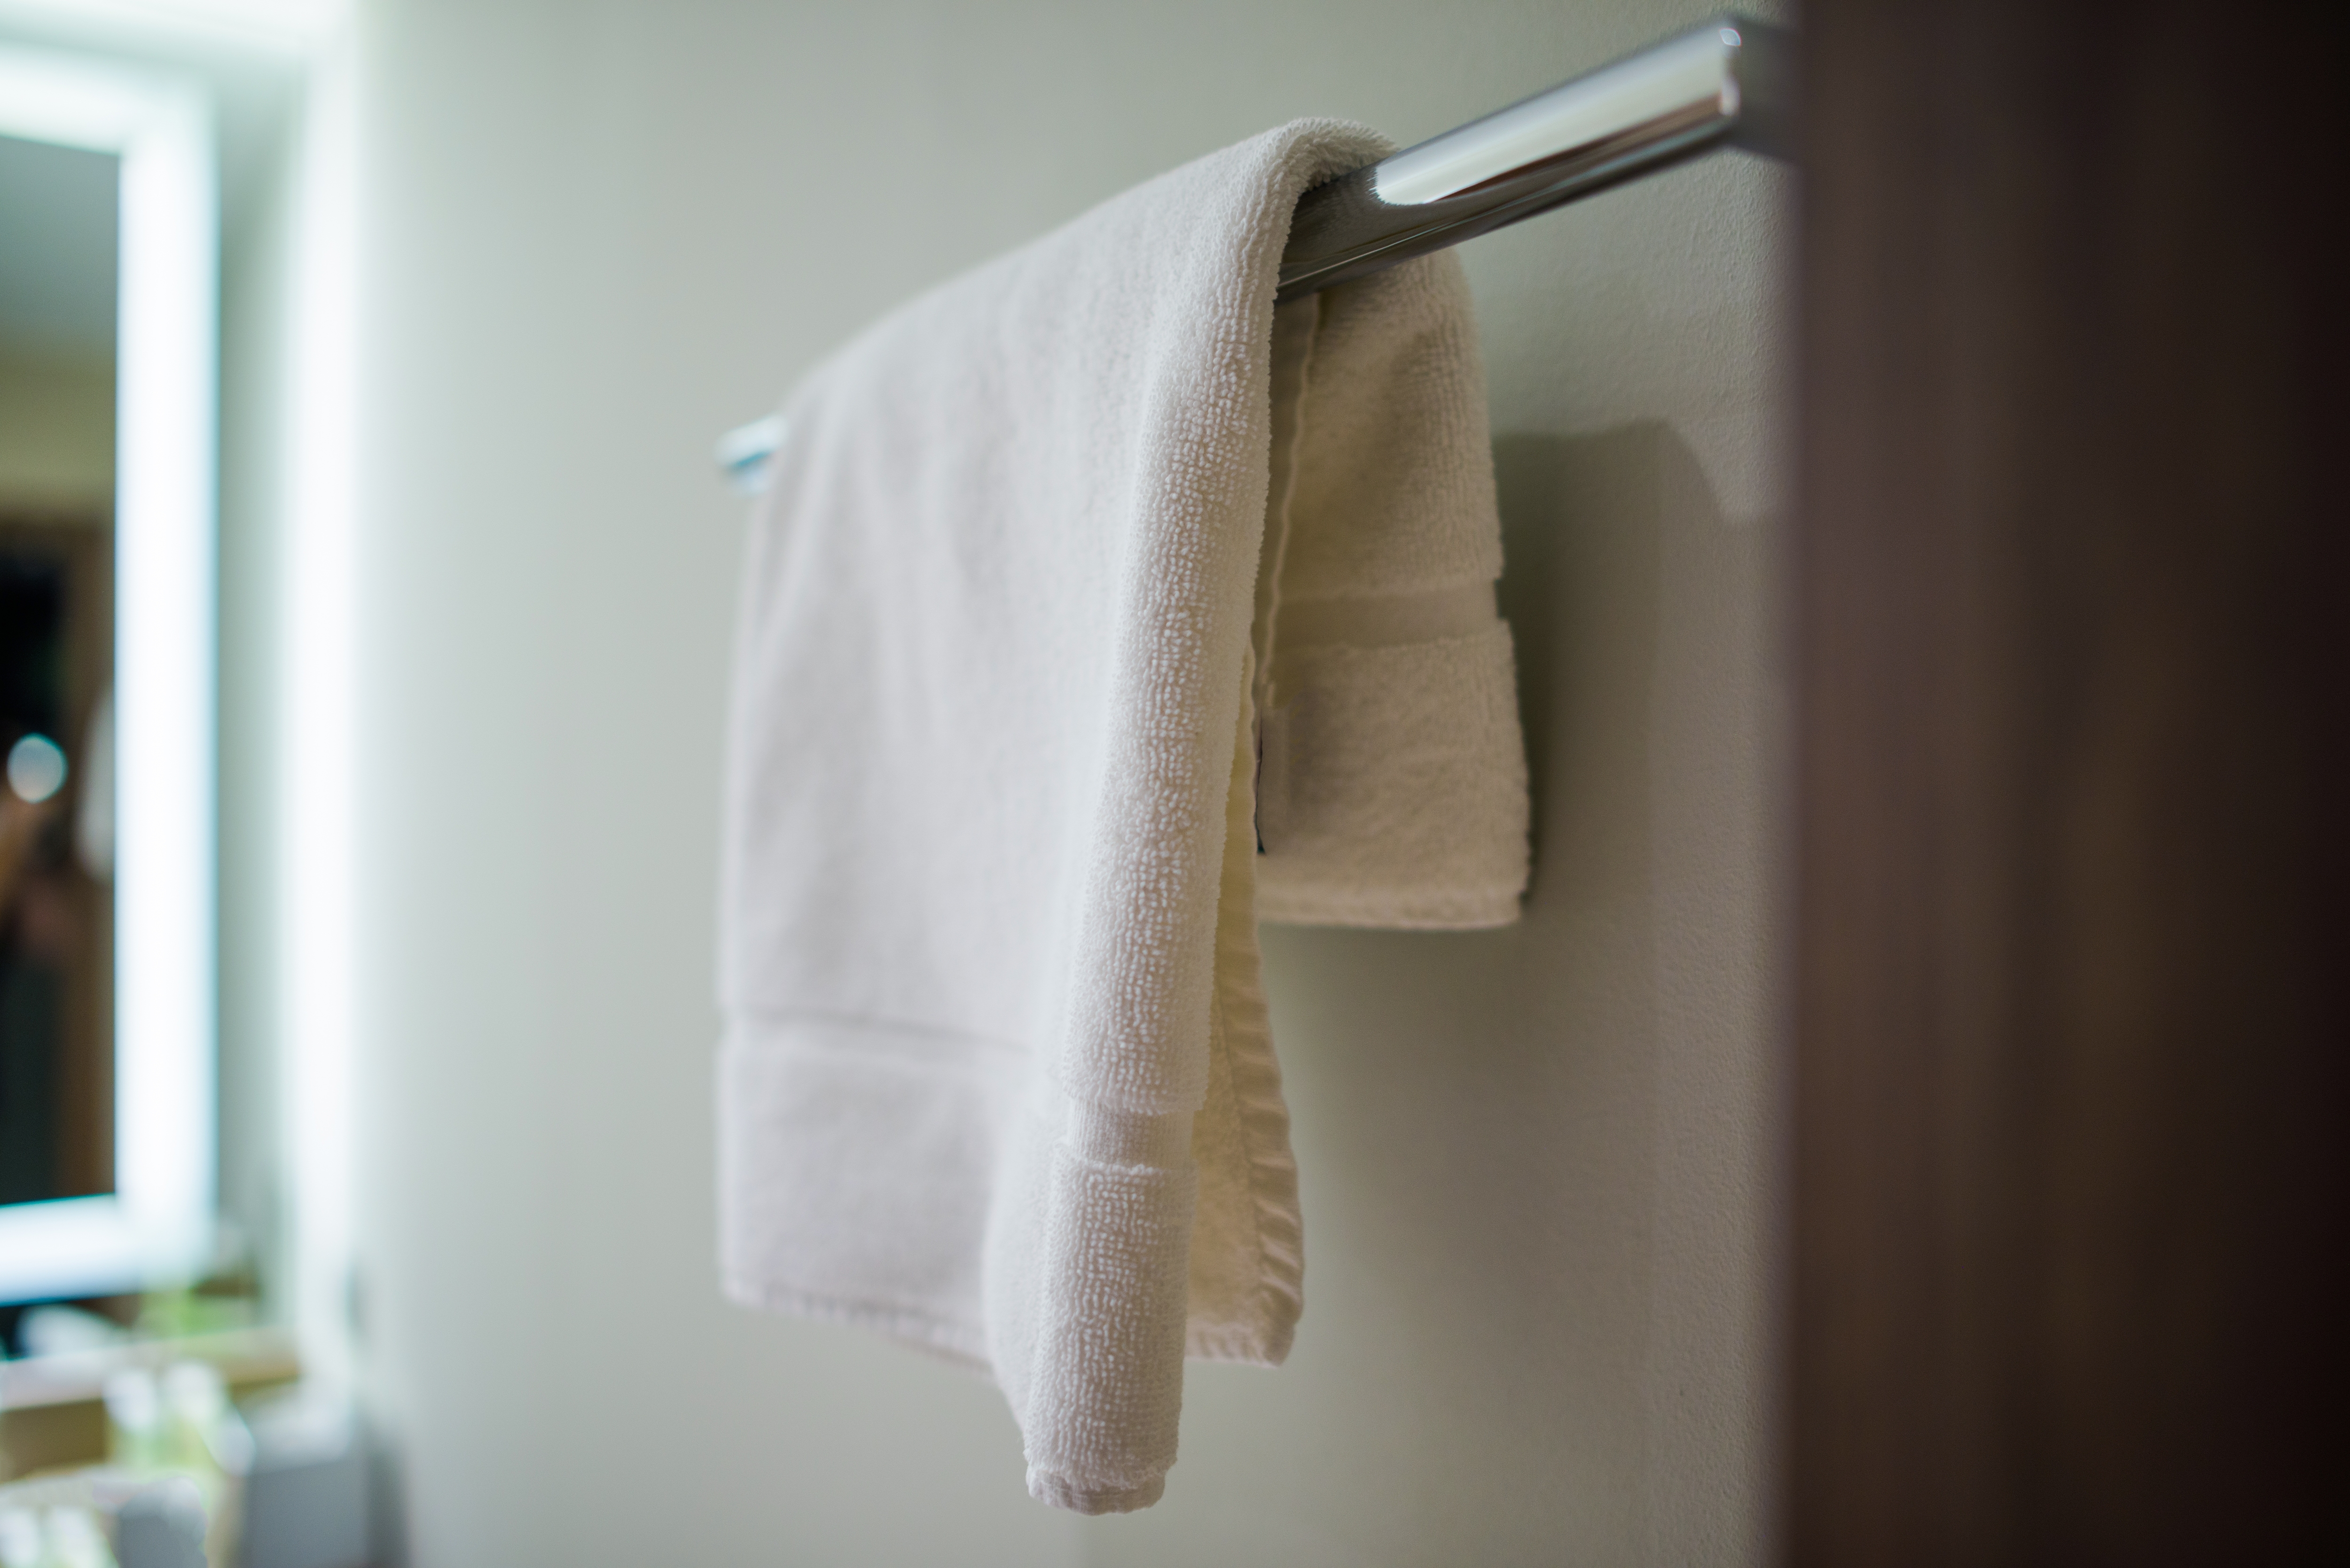 How to Find & Install the Right Towel Bar Height for Your Bathroom | Wayfair